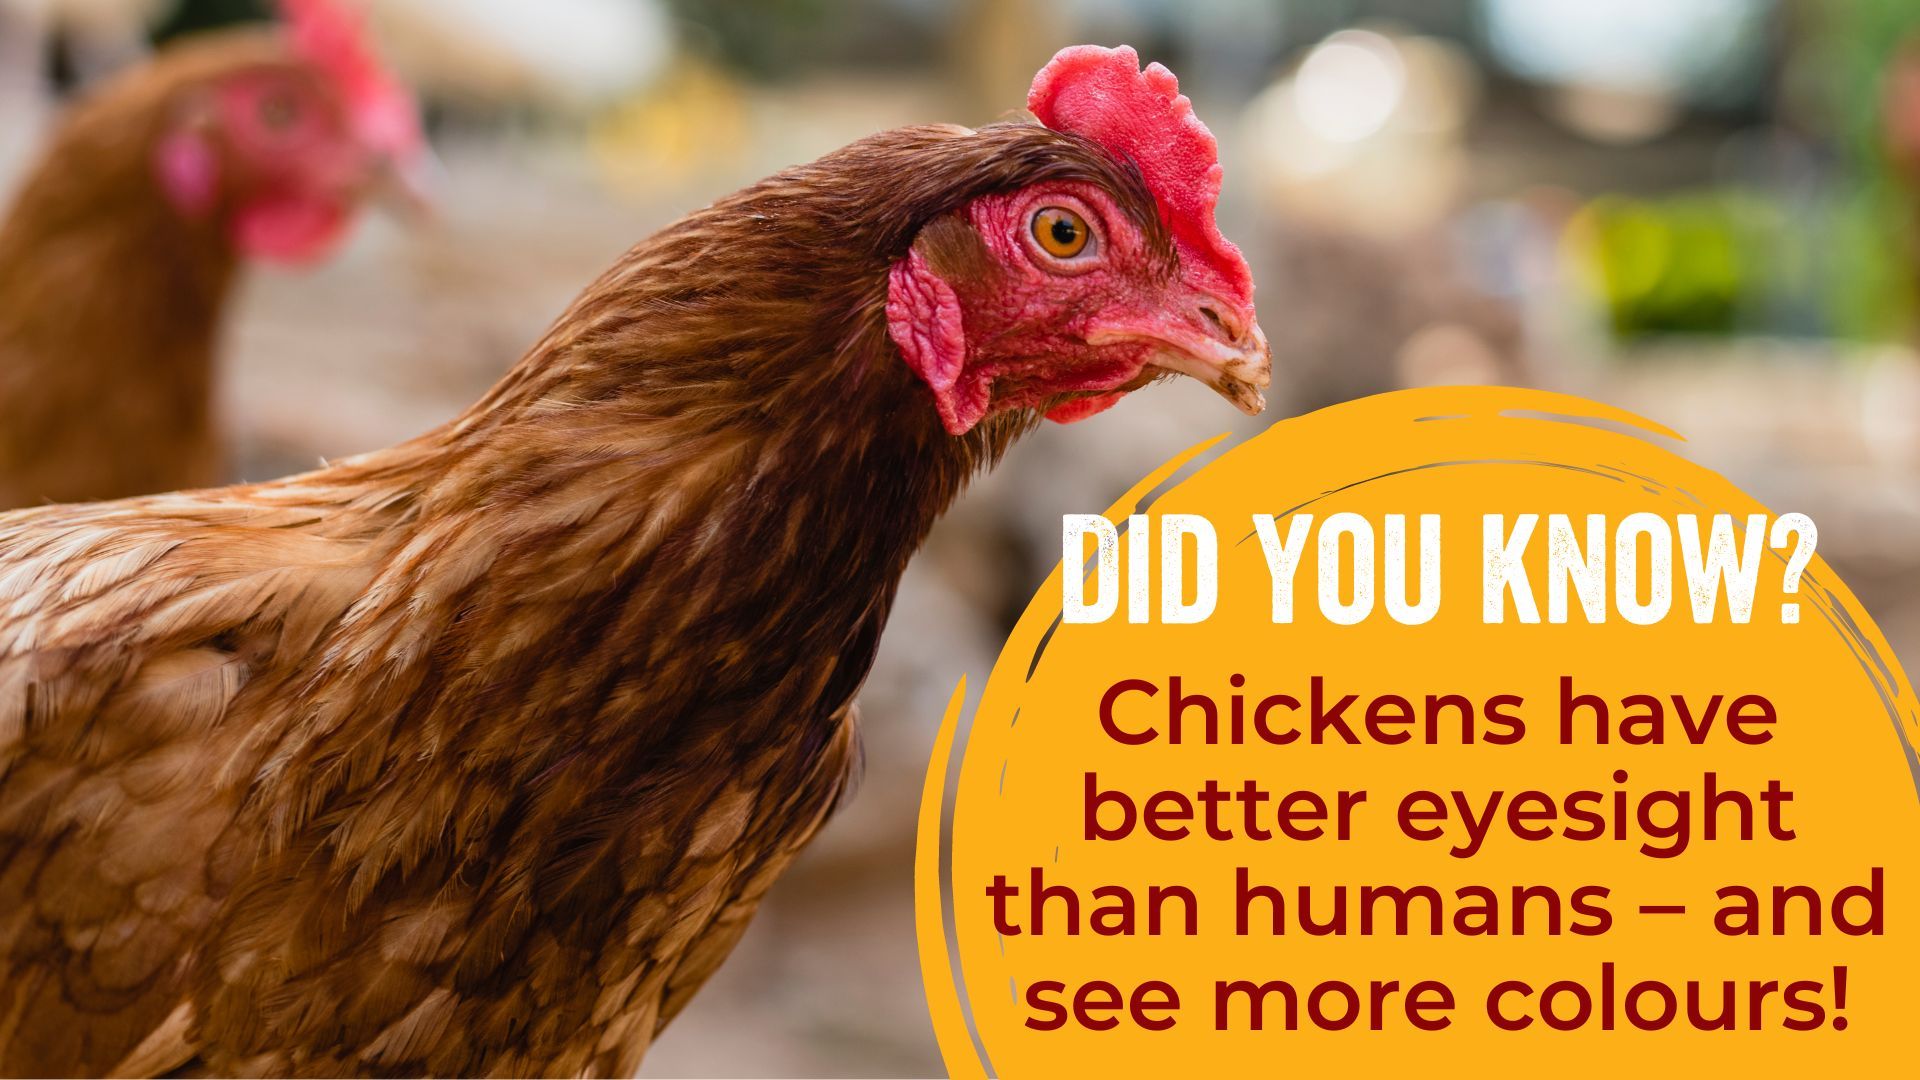 Chickens have better eyesight than humans – and see more colours!